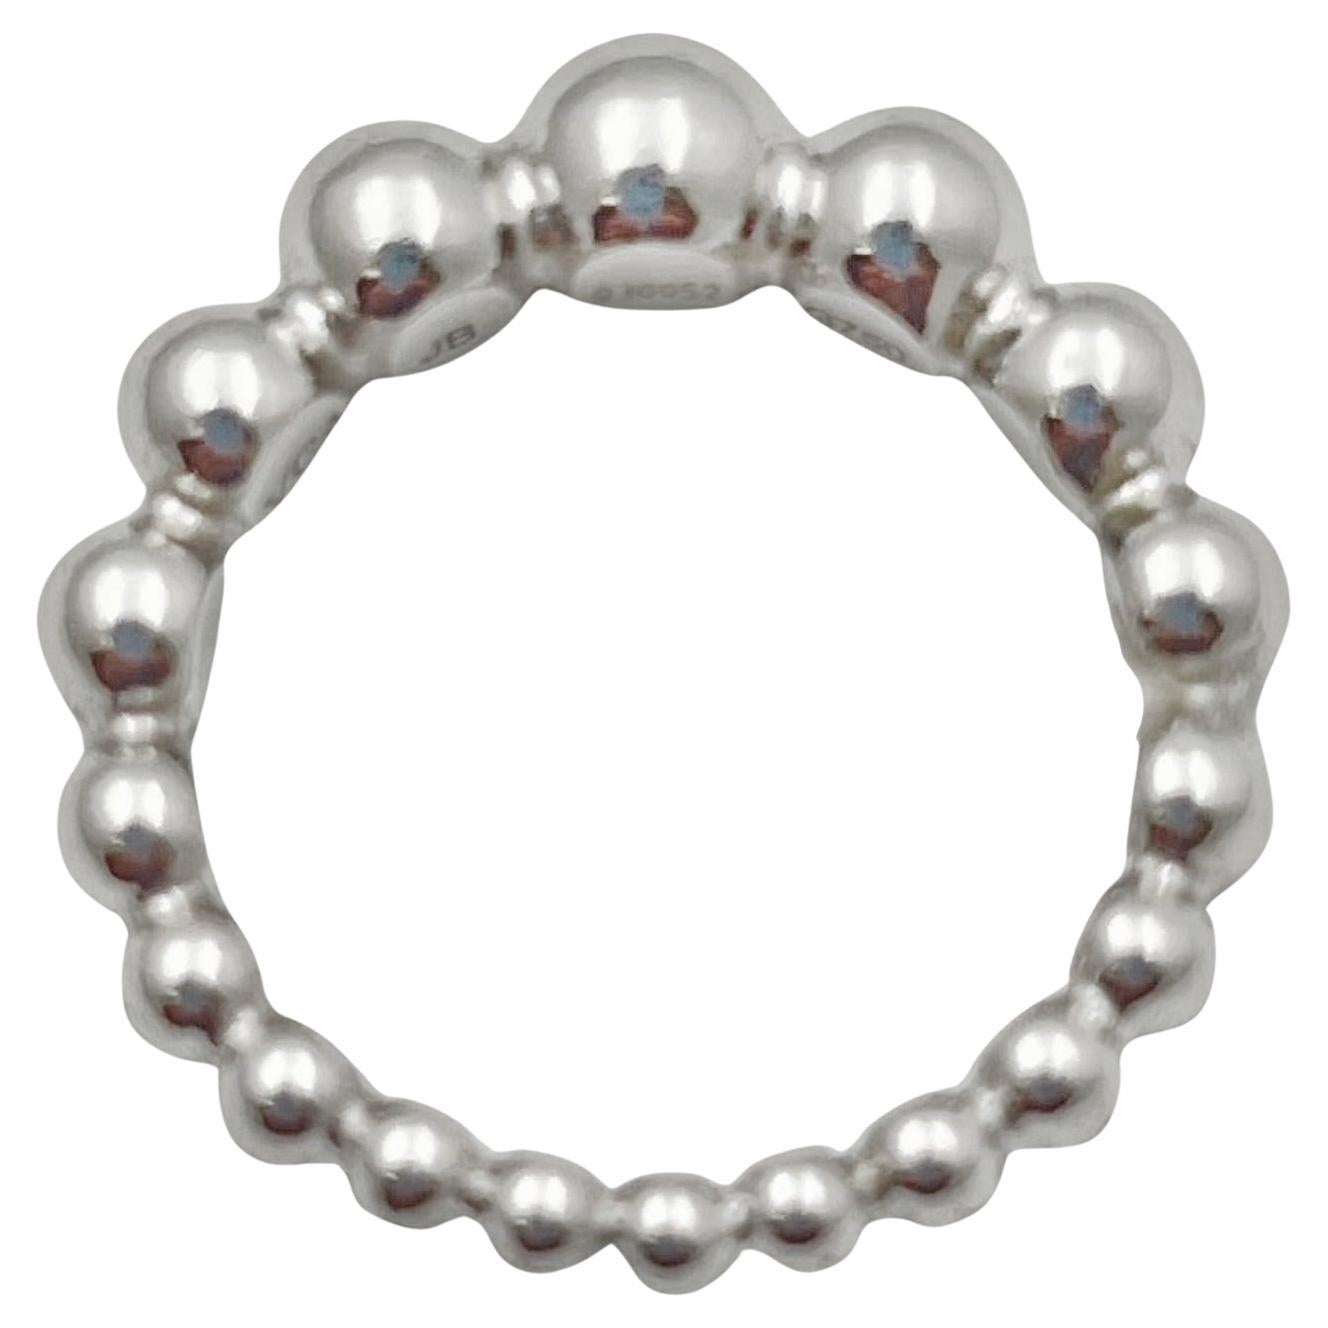 Van Cleef & Arpels Perlée ring in 18k white gold, featuring graduating polished white gold beads. Finger size 5. Signed 